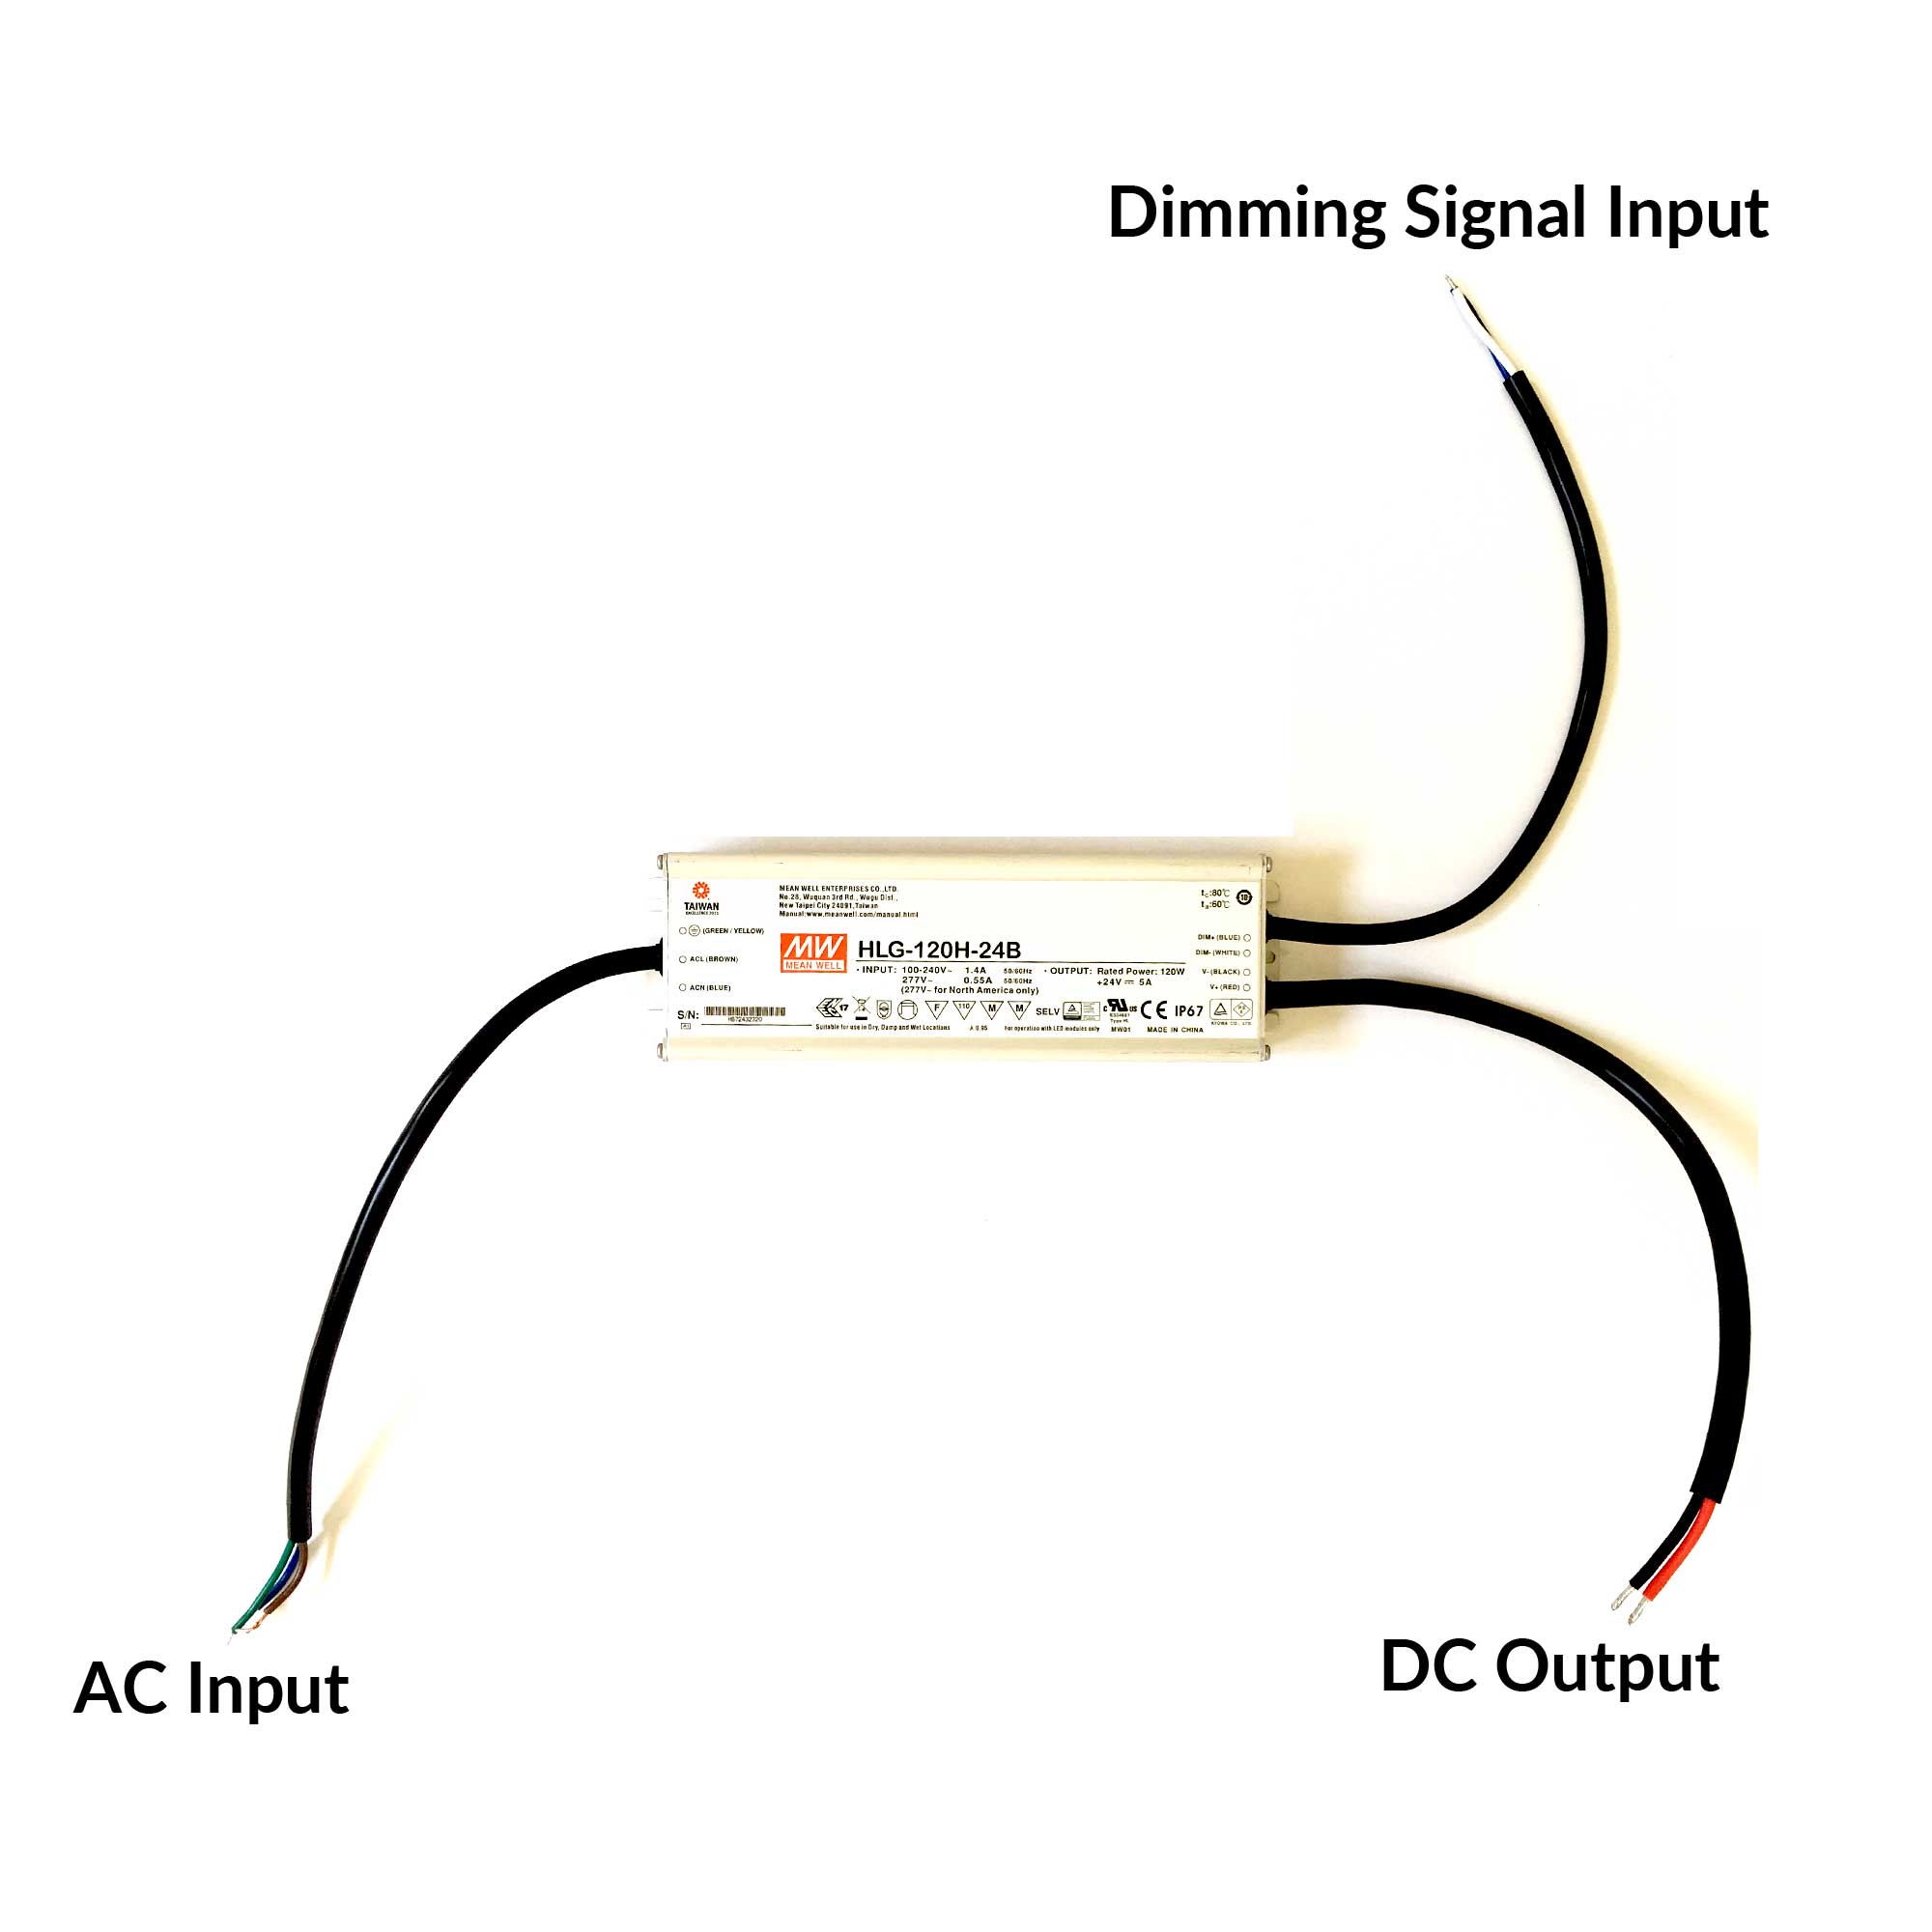 How to Connect An LED Strip to a Power Supply